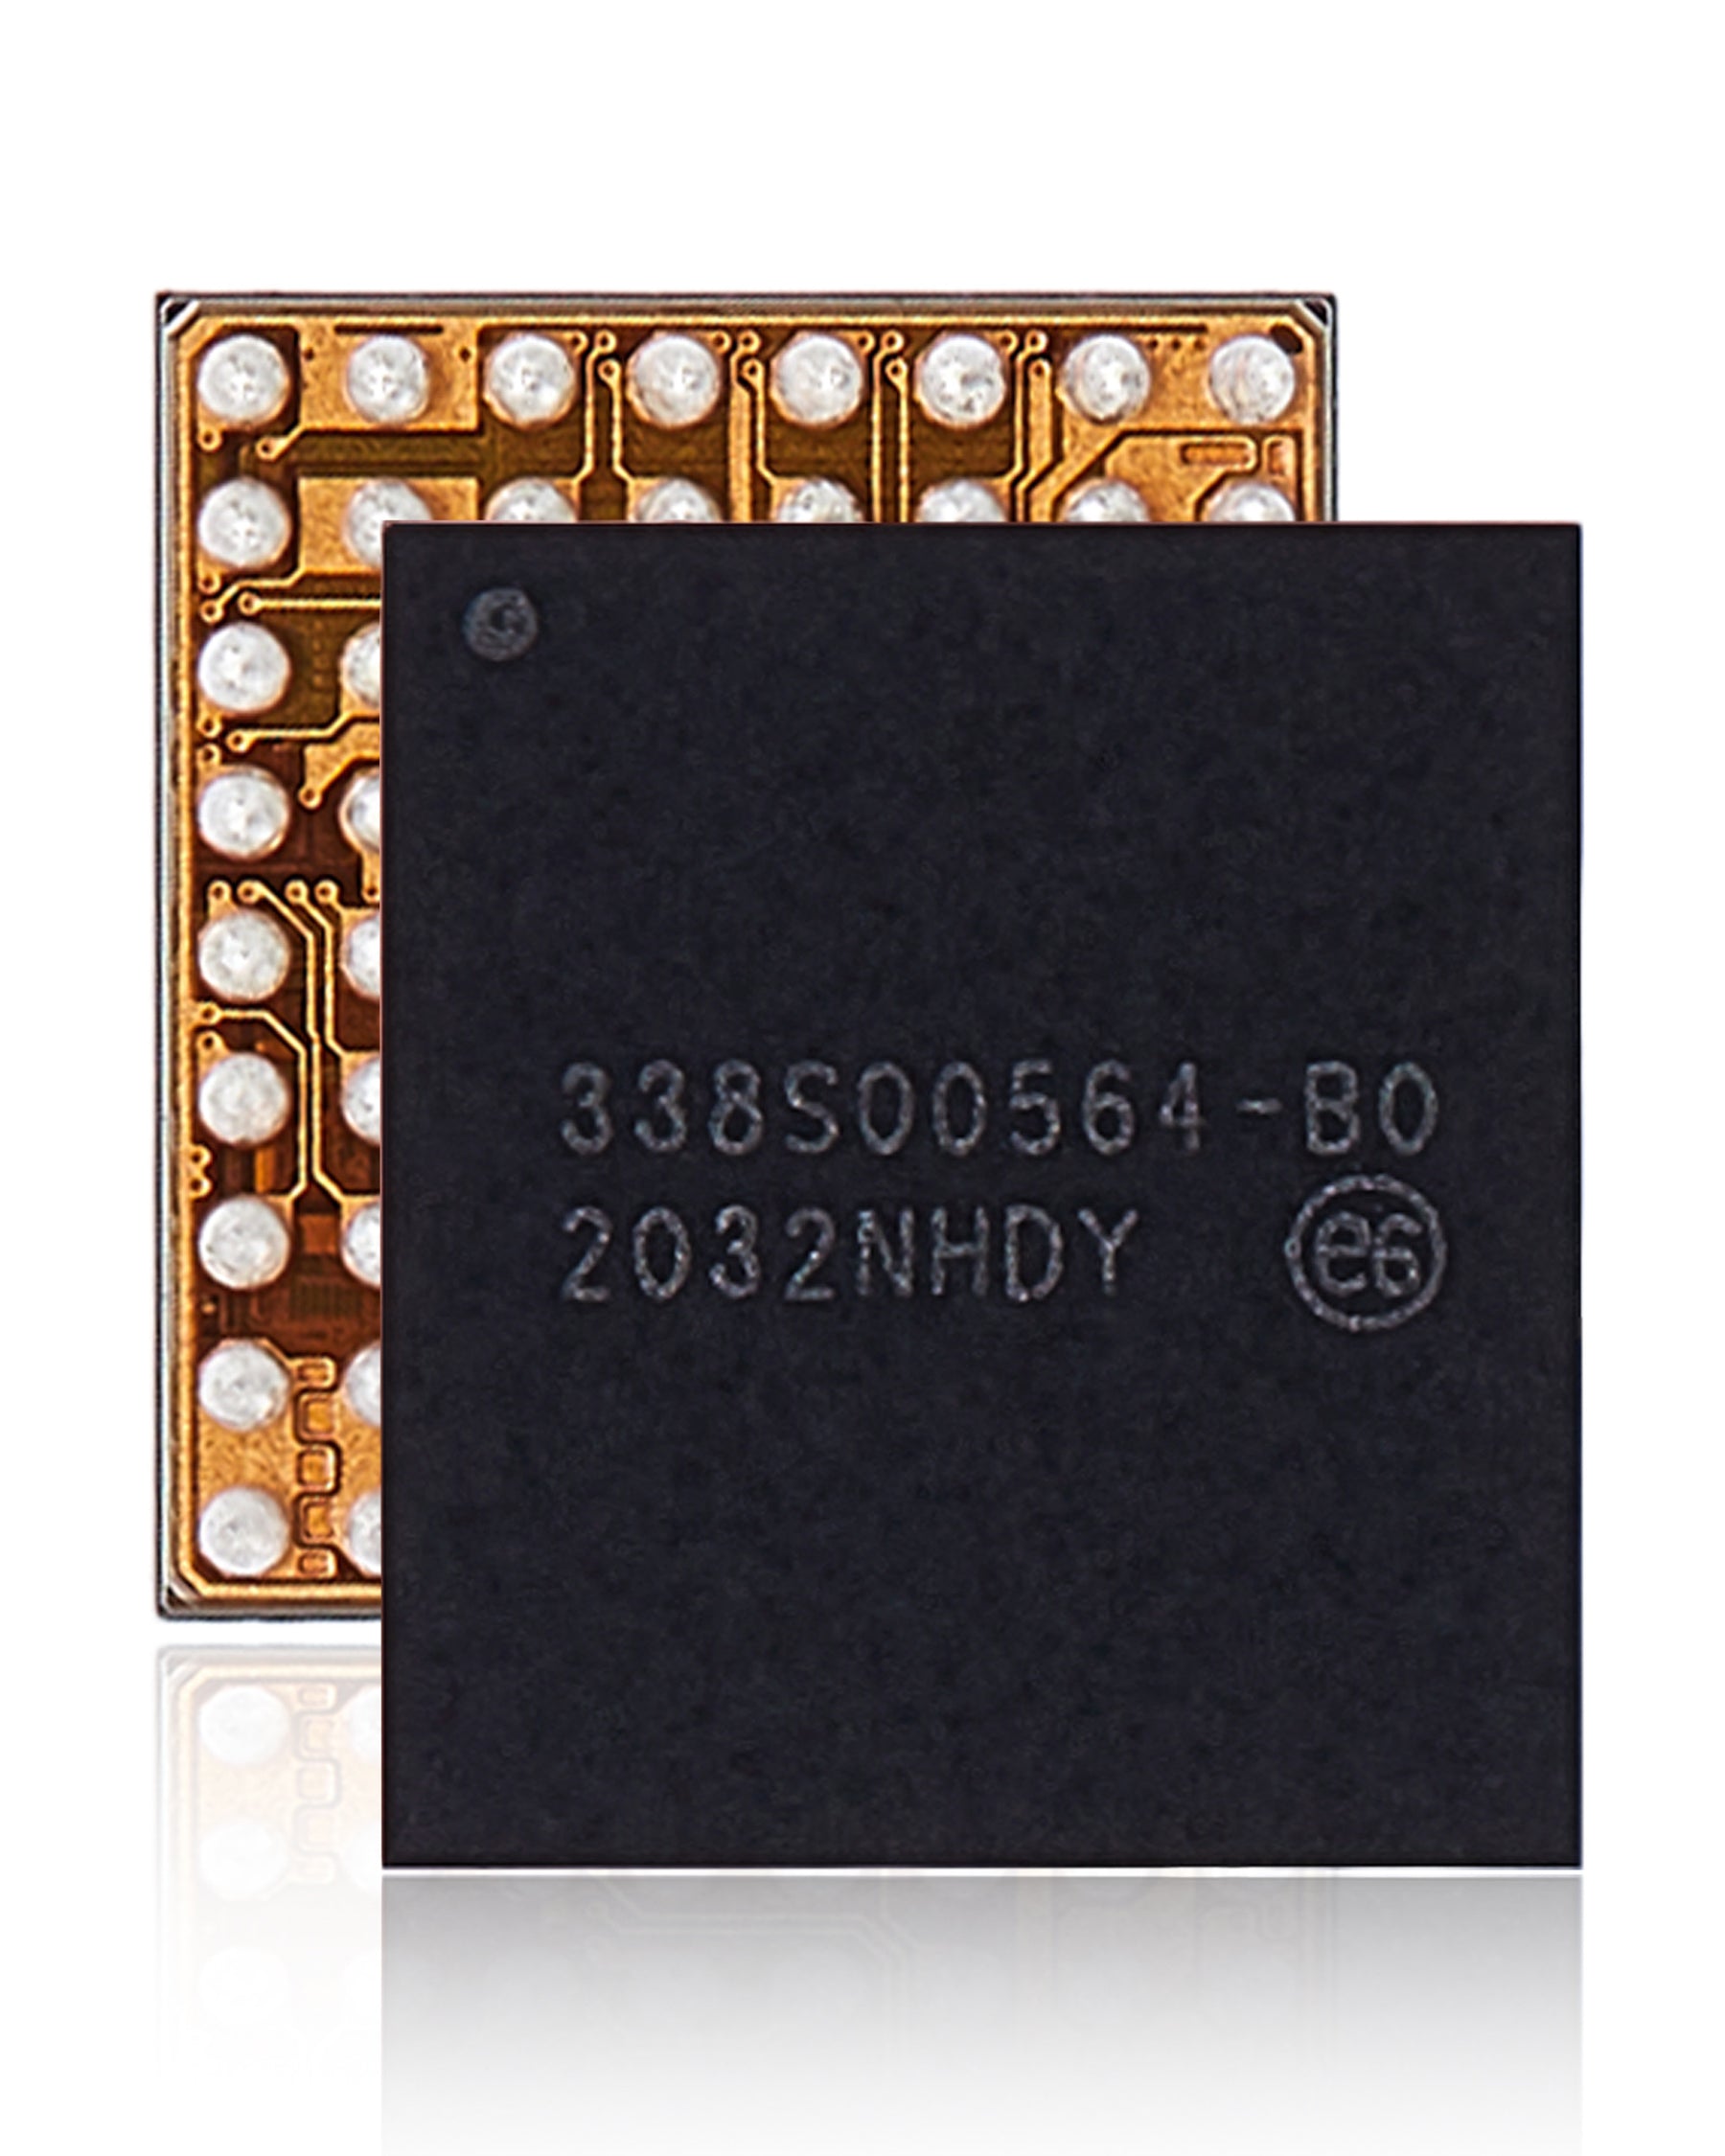 CAMERA IC CHIP COMPATIBLE WITH IPHONE 12 / 12 MINI / 12 PRO / 12 PRO M